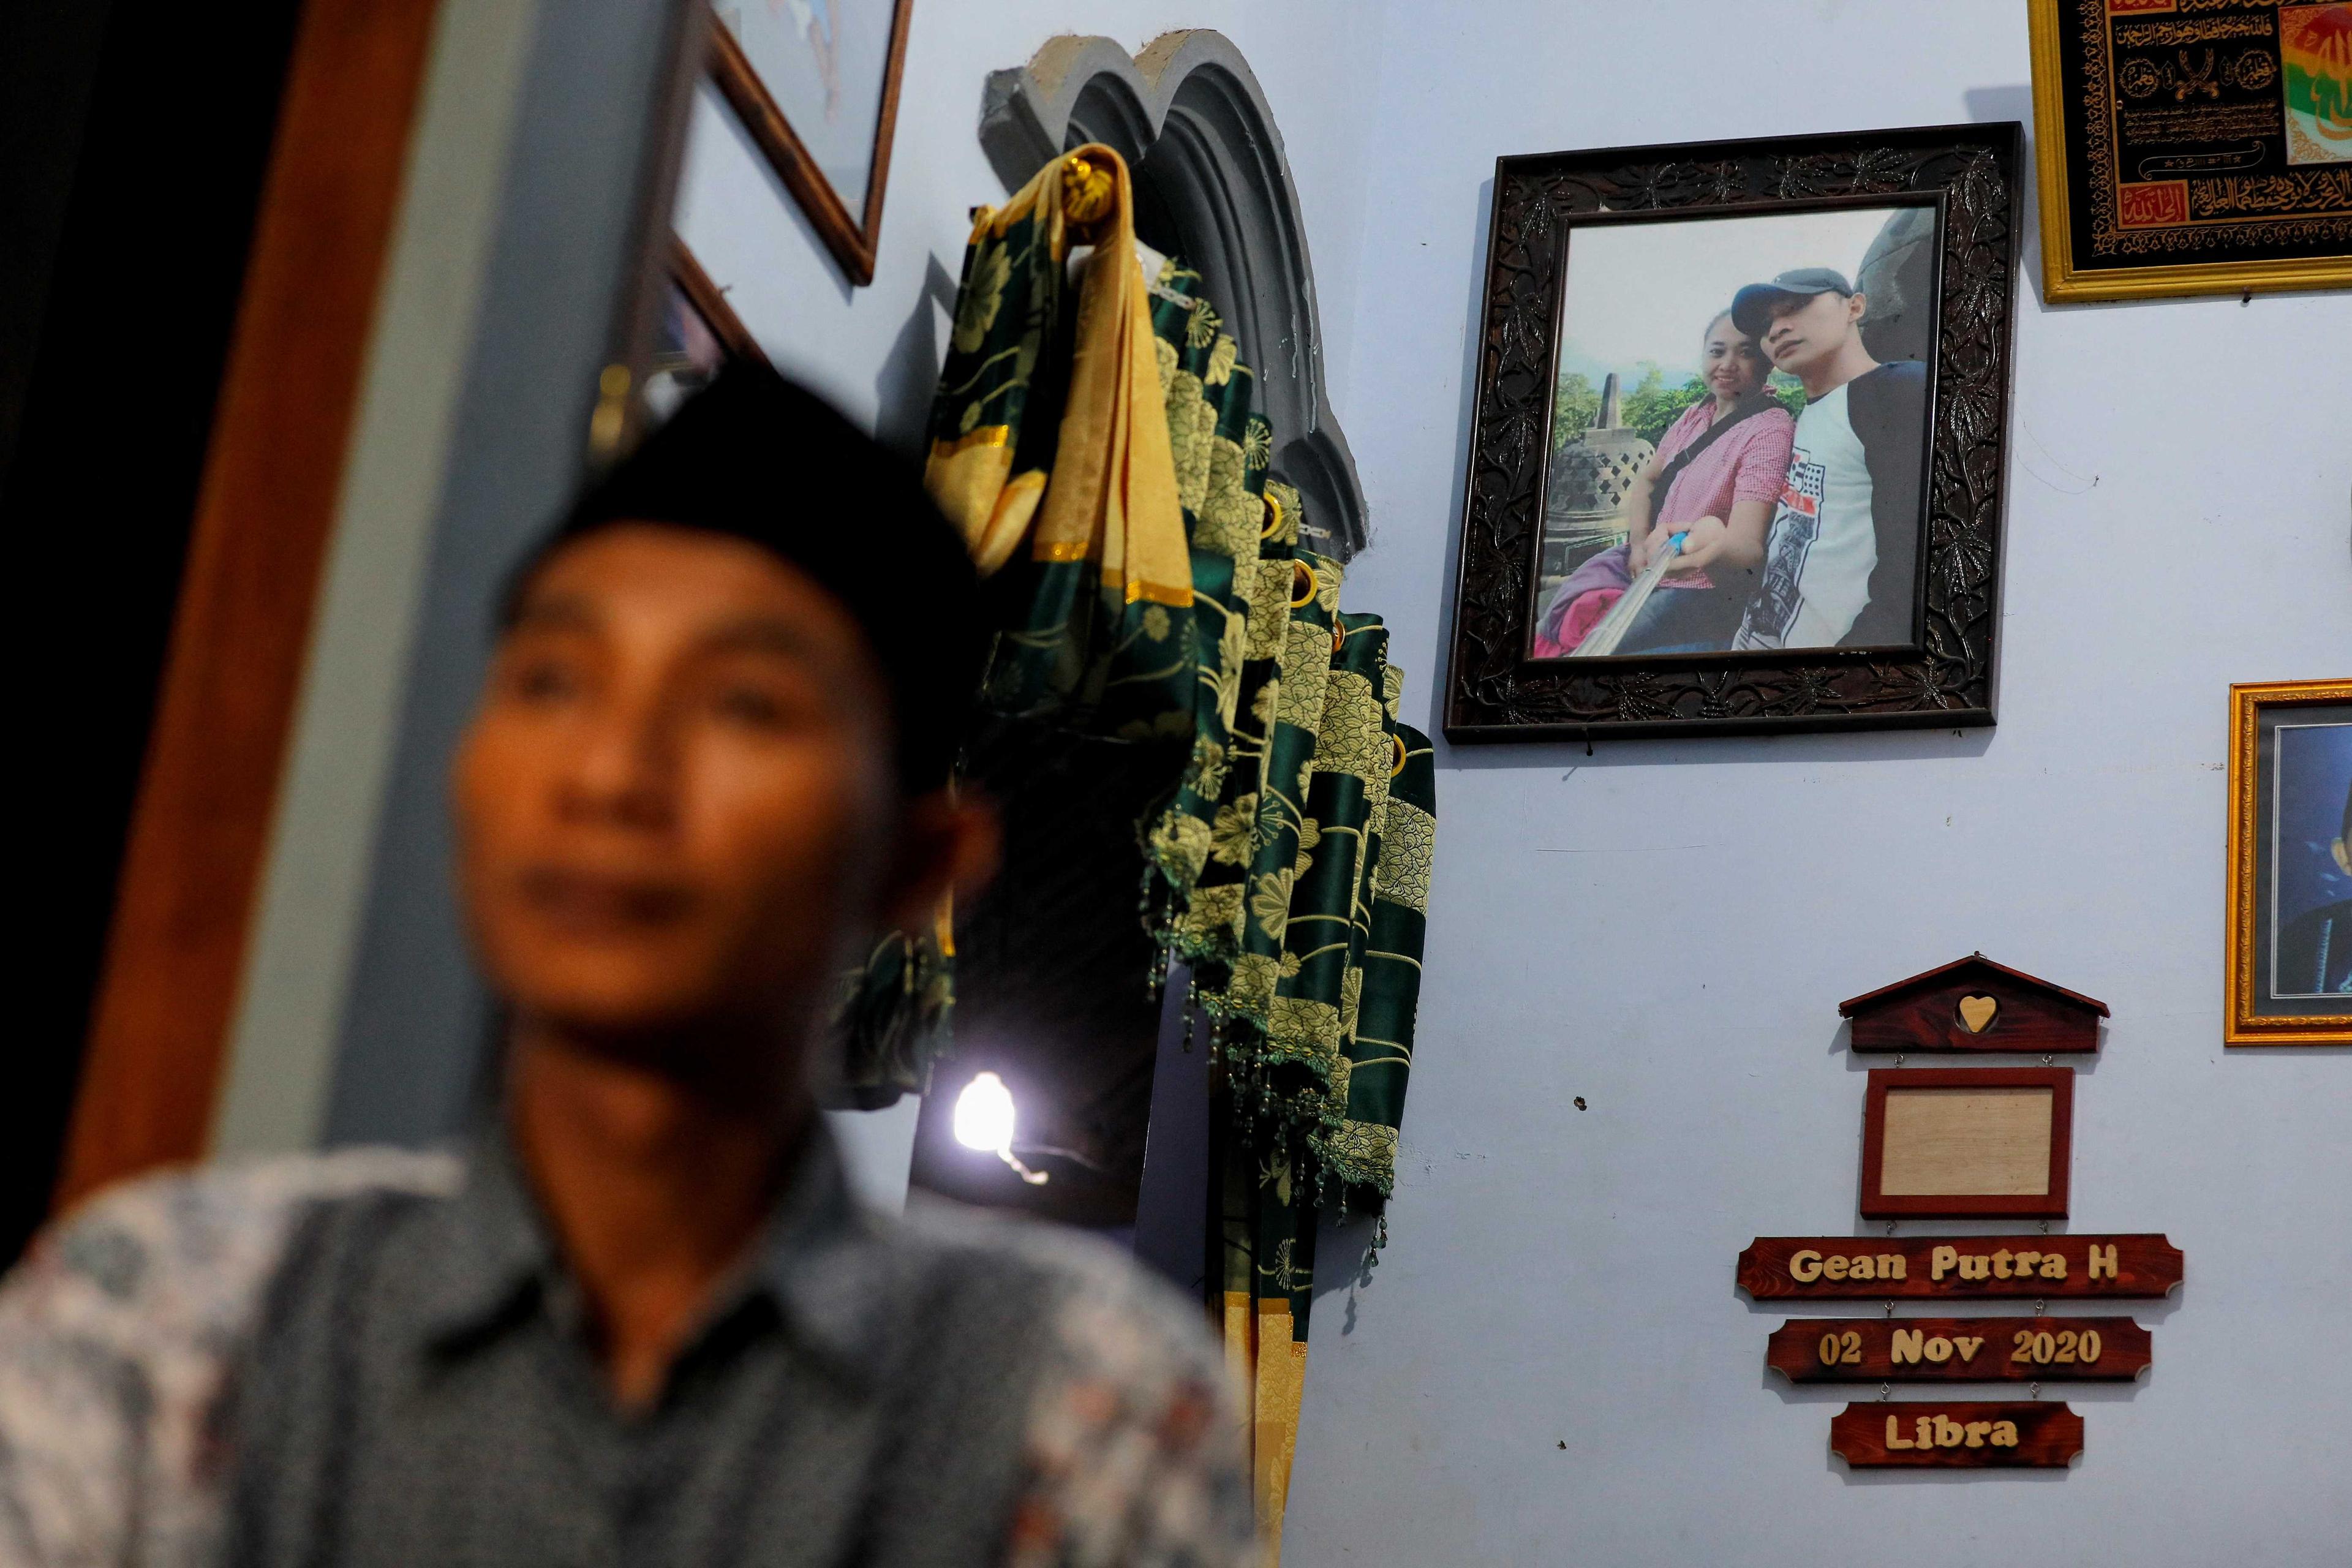 A picture of Andi Hariyanto and his late wife Gebi Asta Putri Purwoko, who died in a recent riot and stampede following a football match between Arema FC and Persebaya Surabaya at Kanjuruhan stadium, hangs on a wall at his house in Malang, East Java province, Indonesia, Oct 4. Photo: Reuters